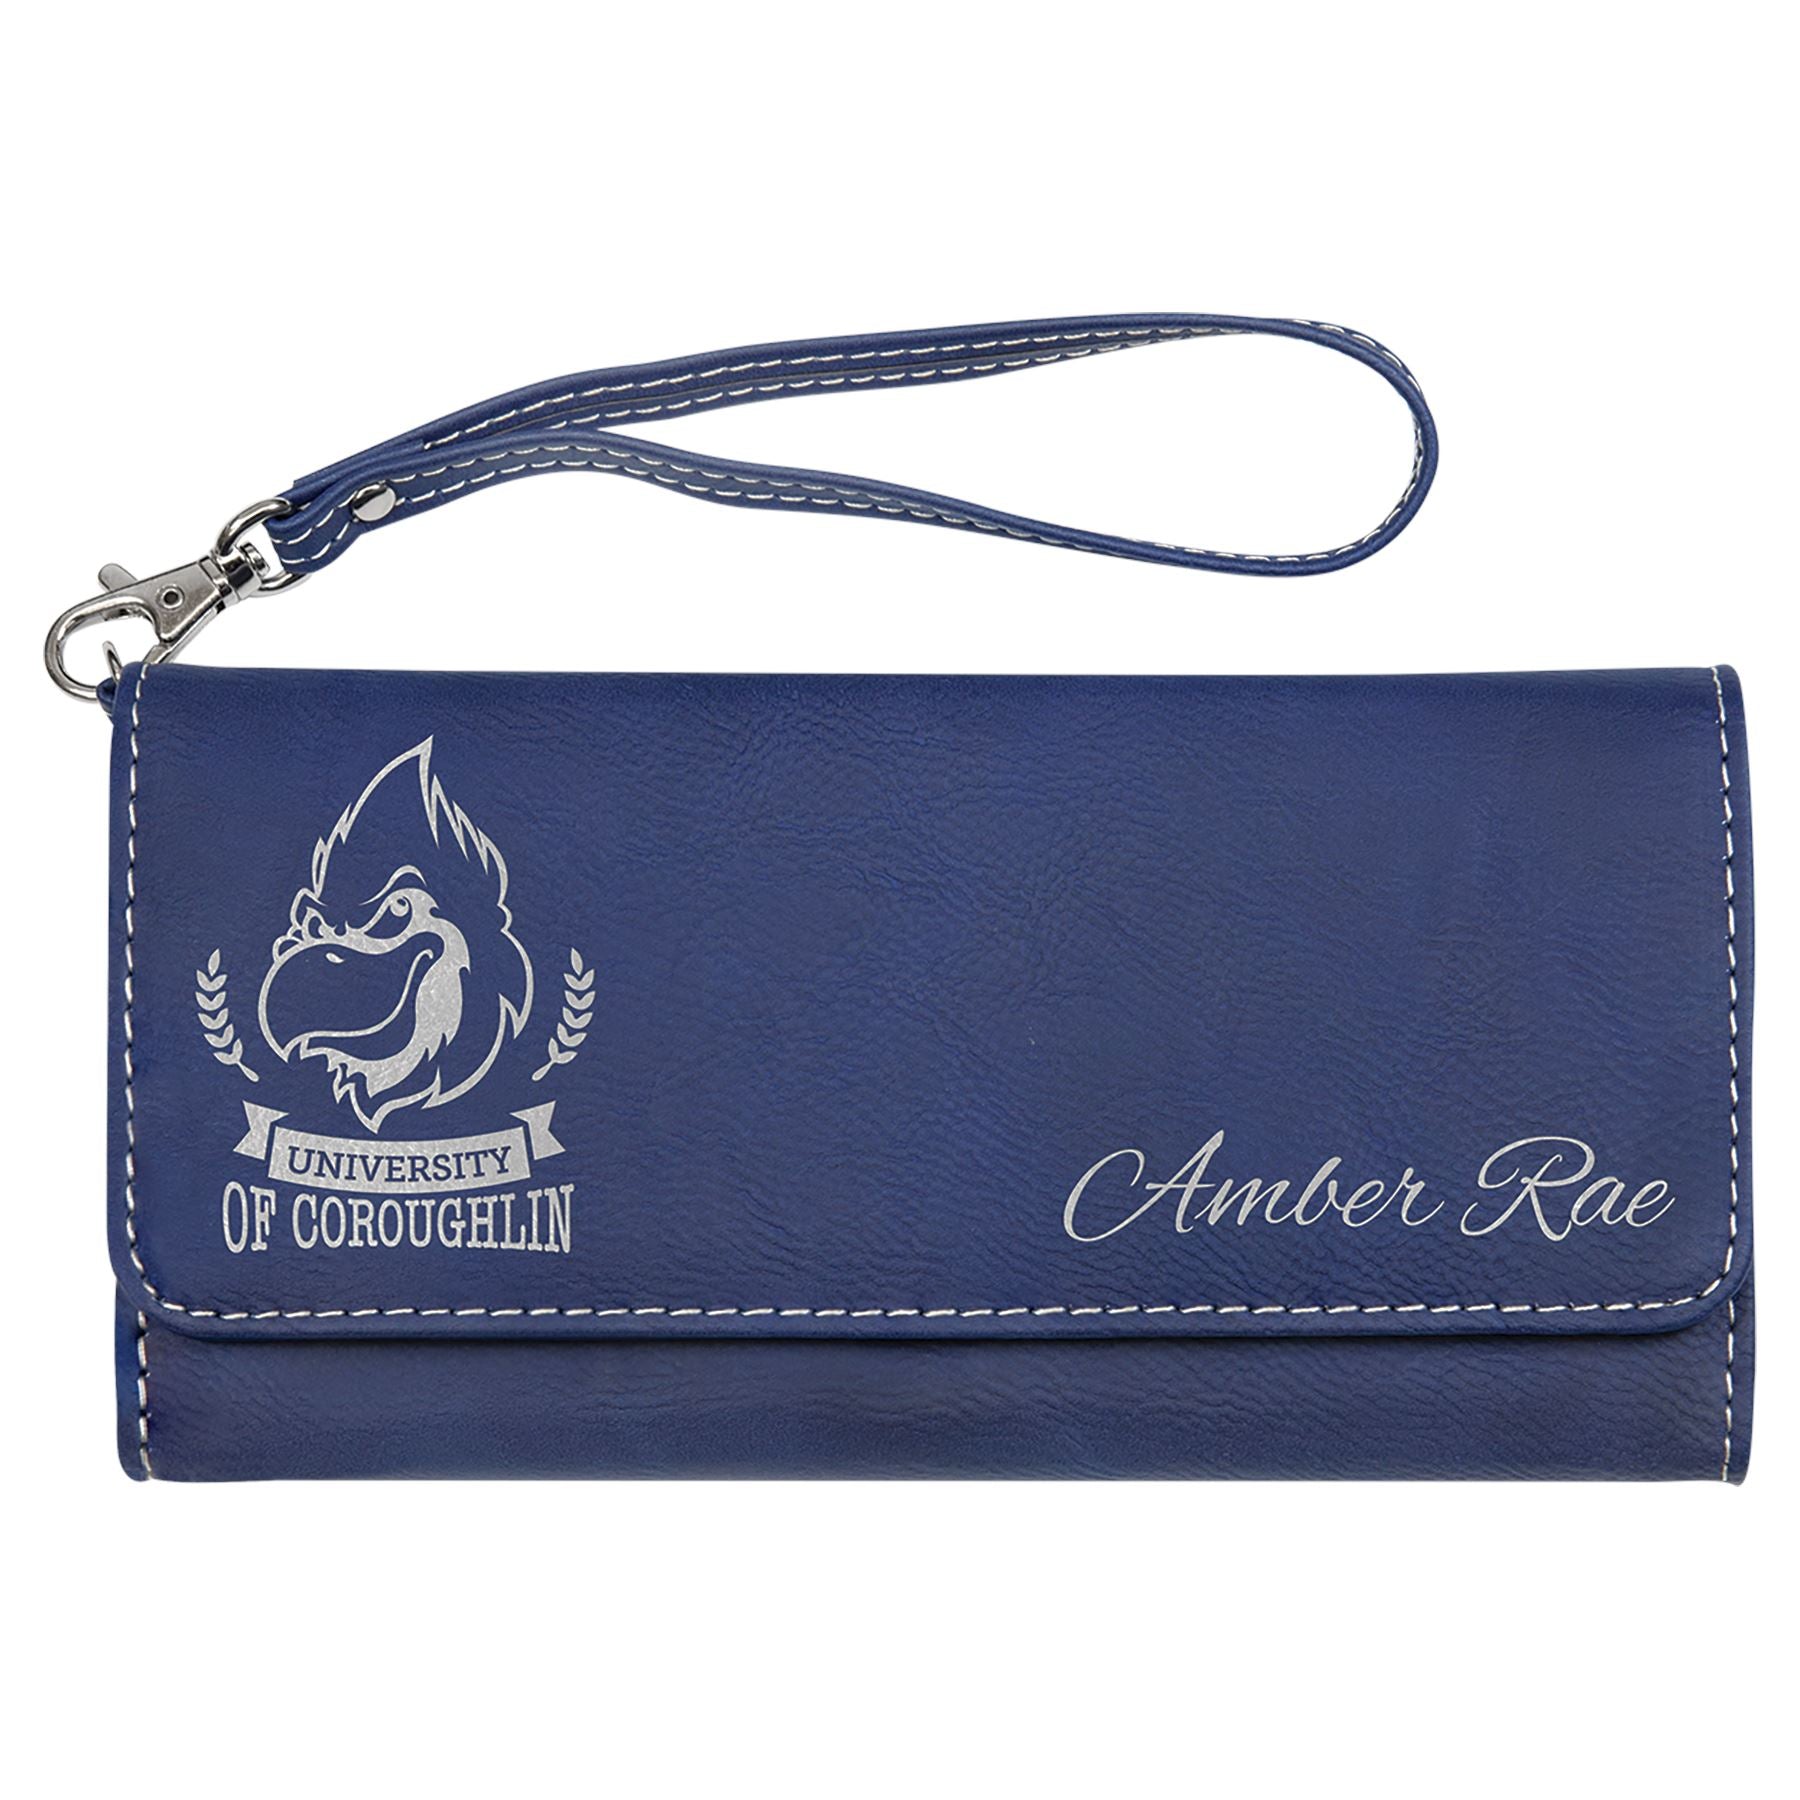 Wallet w/Strap, Laserable Leatherette, Laser Engraved Wallets Craftworks NW Blue/Silver Front Only Small